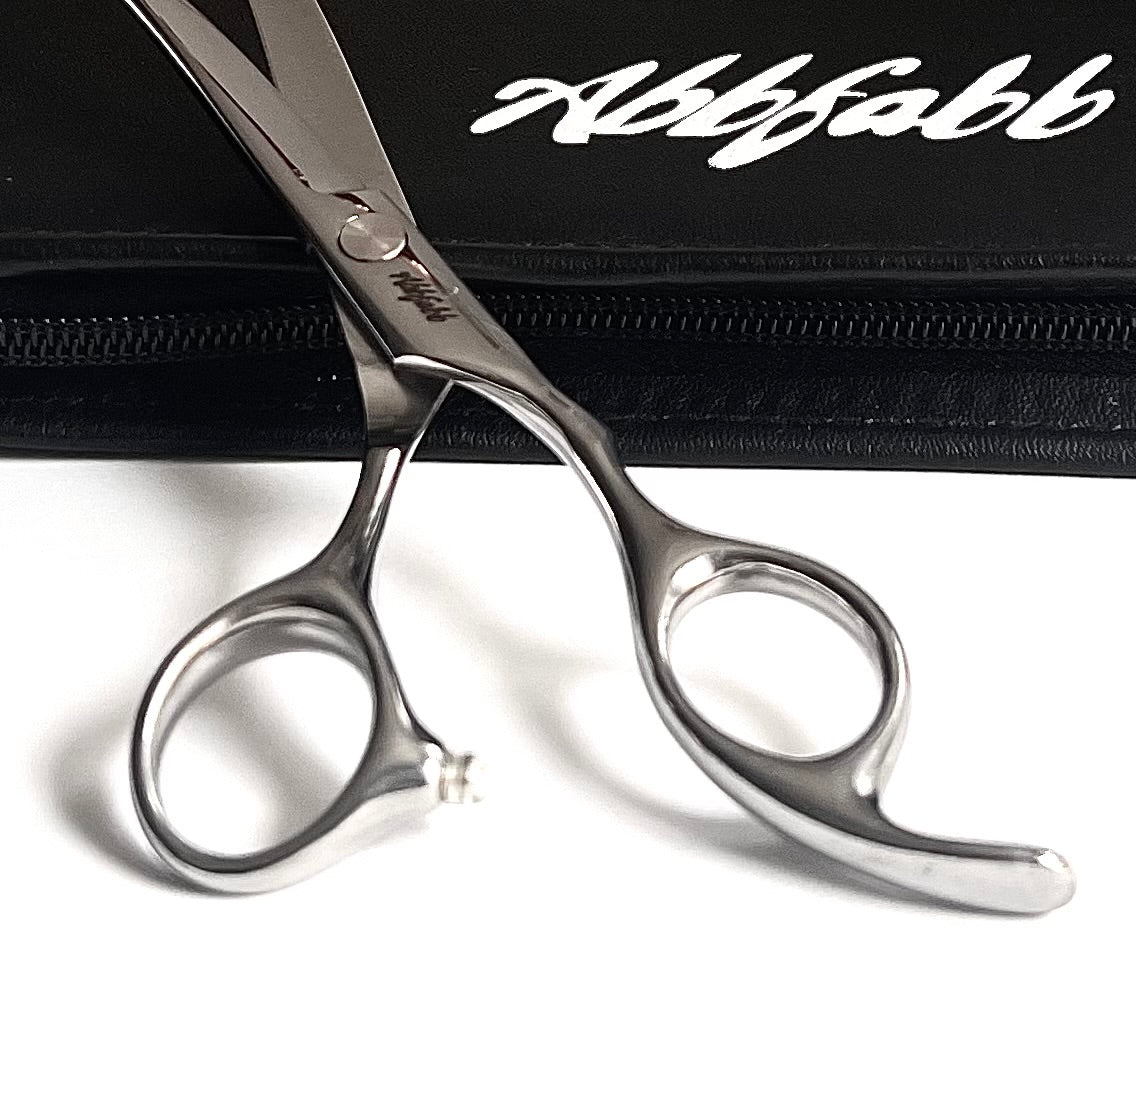 7" Curved Dog Grooming Scissor with Pinpoint Tip by Abbfabb Dog Grooming Scissors Ltd